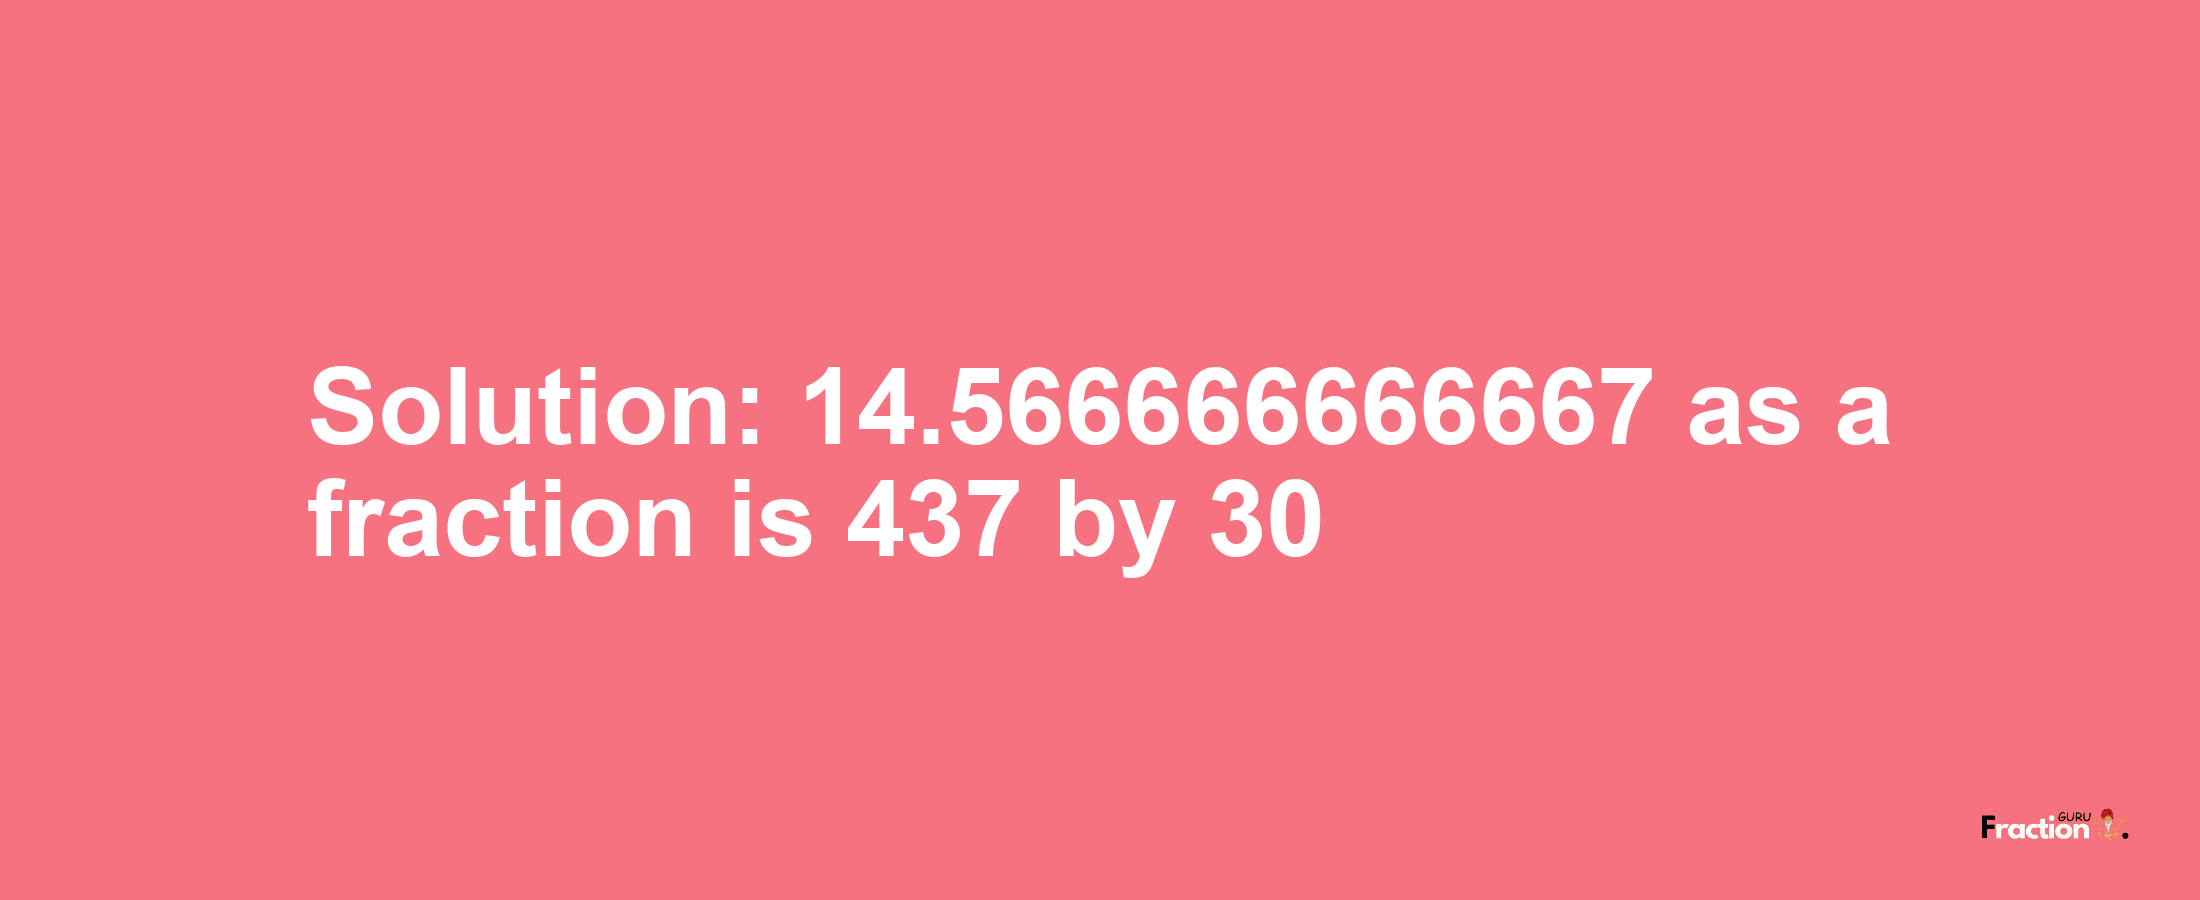 Solution:14.566666666667 as a fraction is 437/30